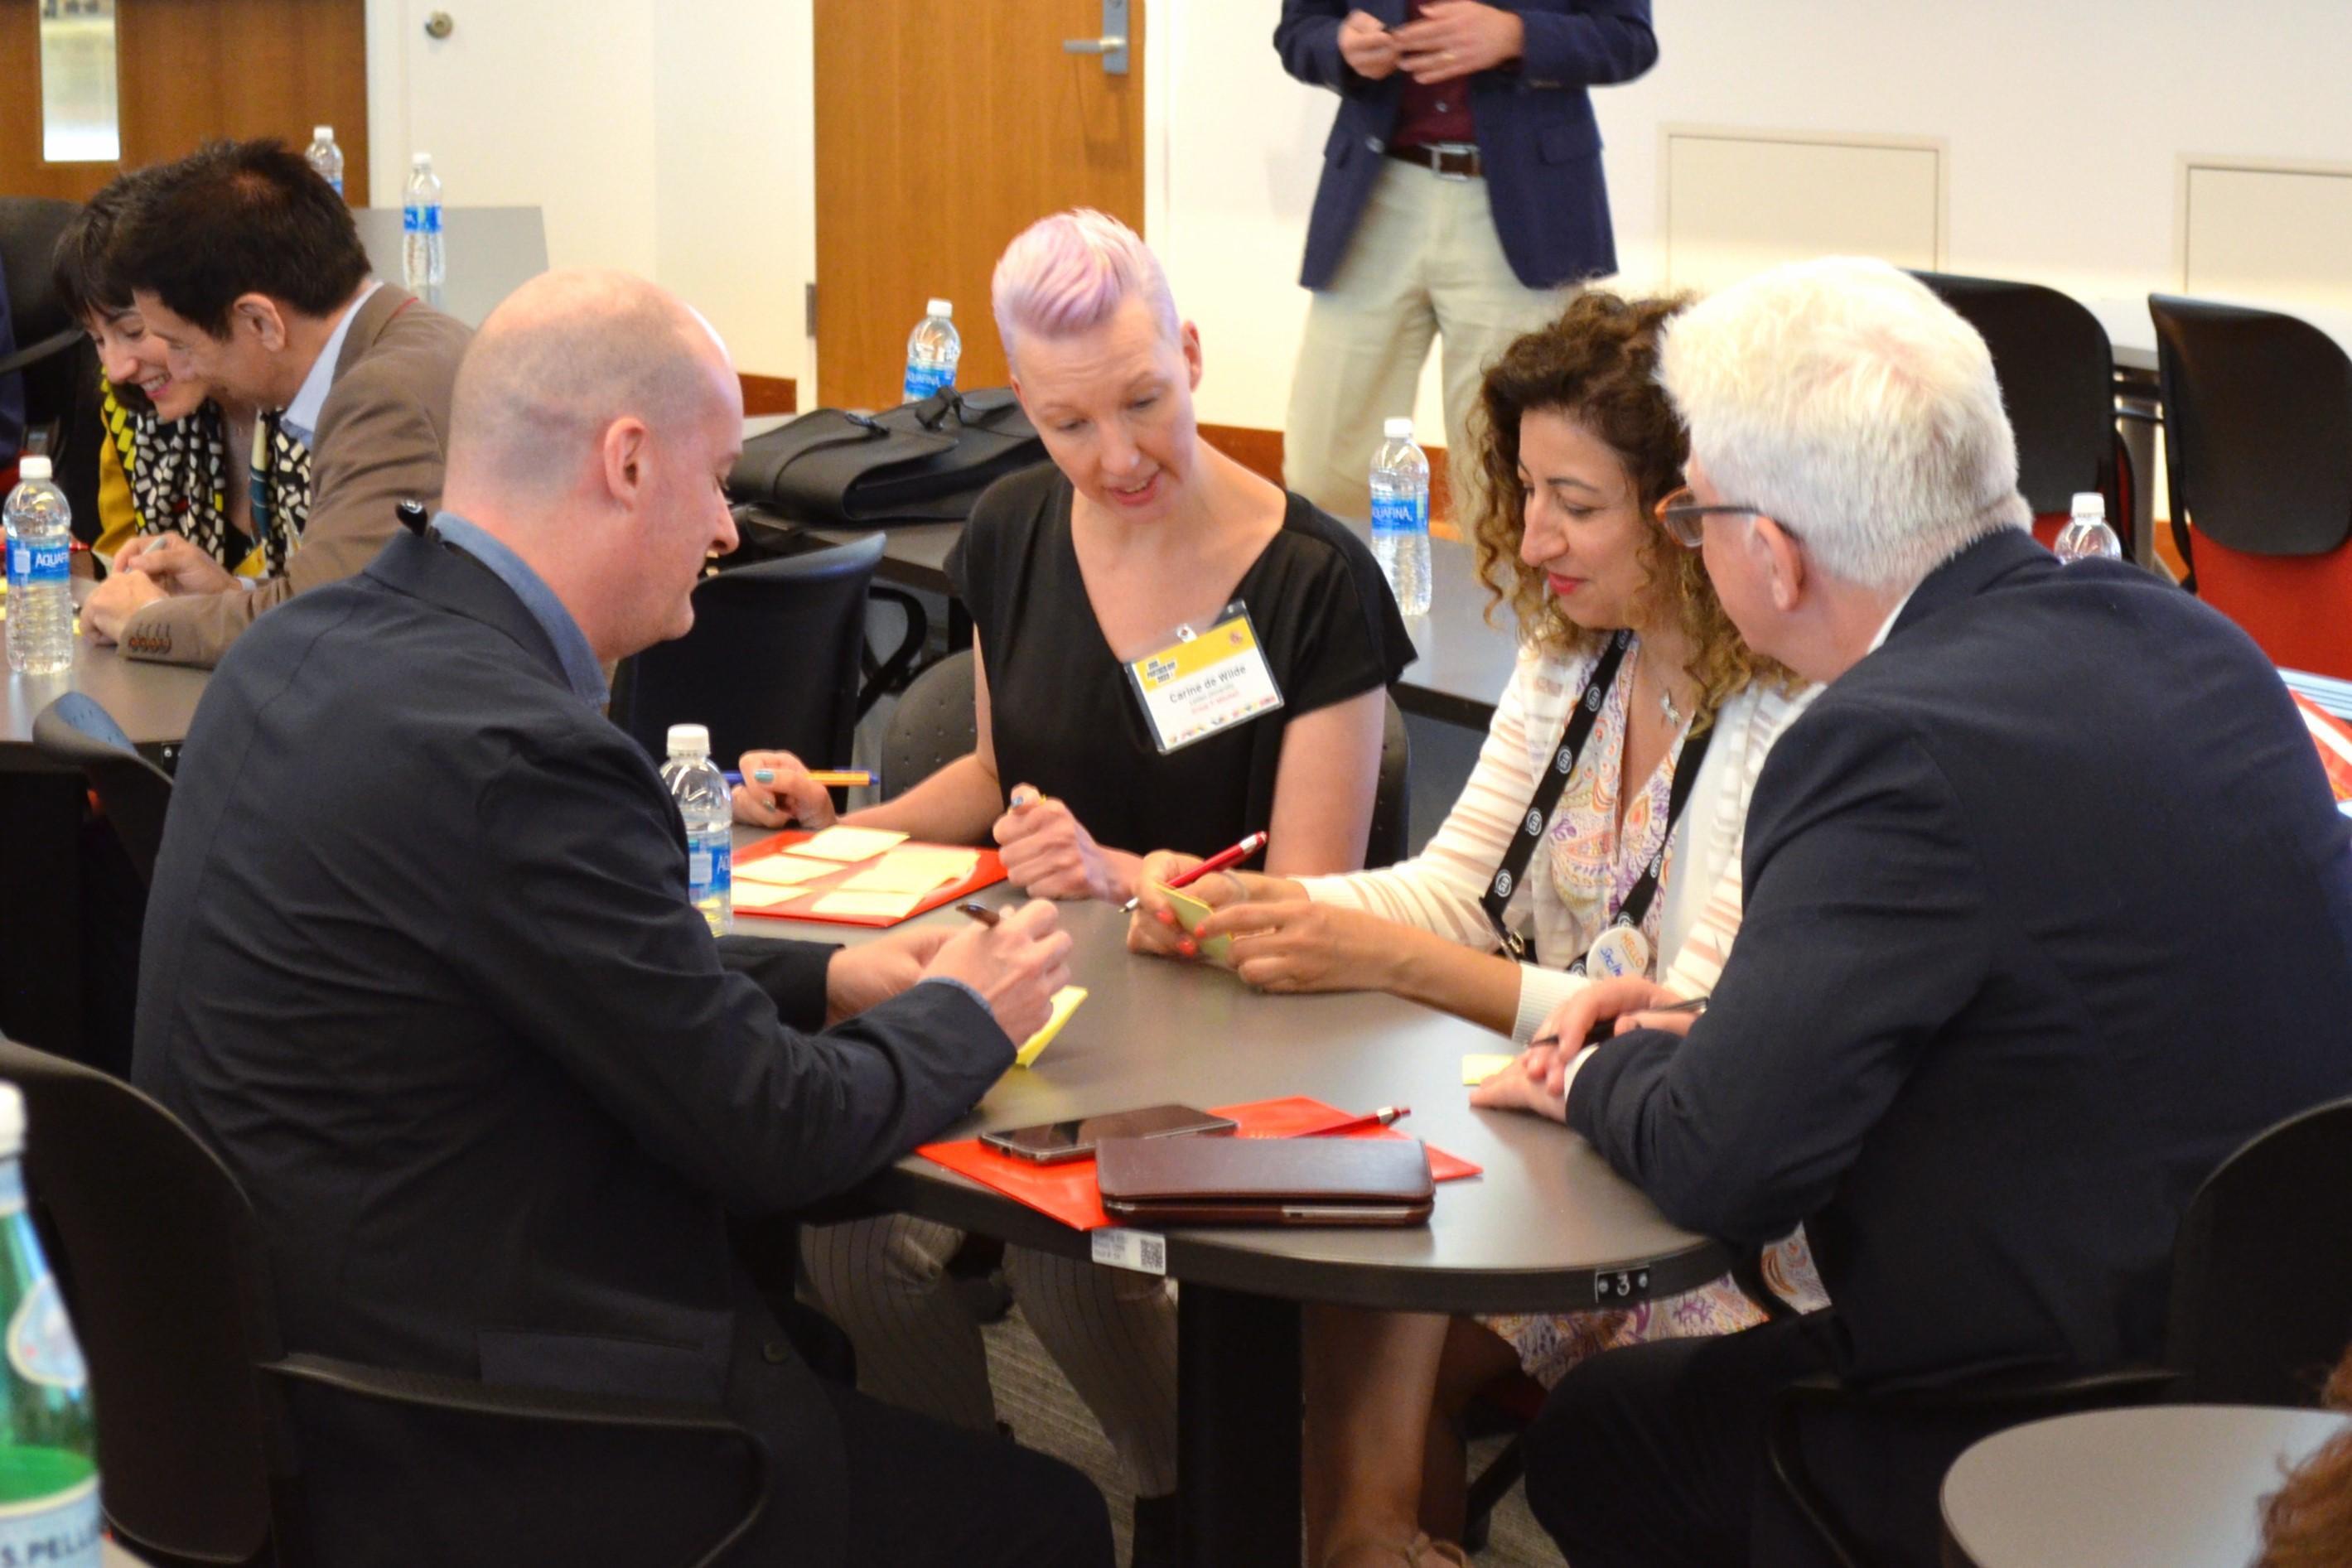 Higher education professionals from partner institutions gather around a table in discussion